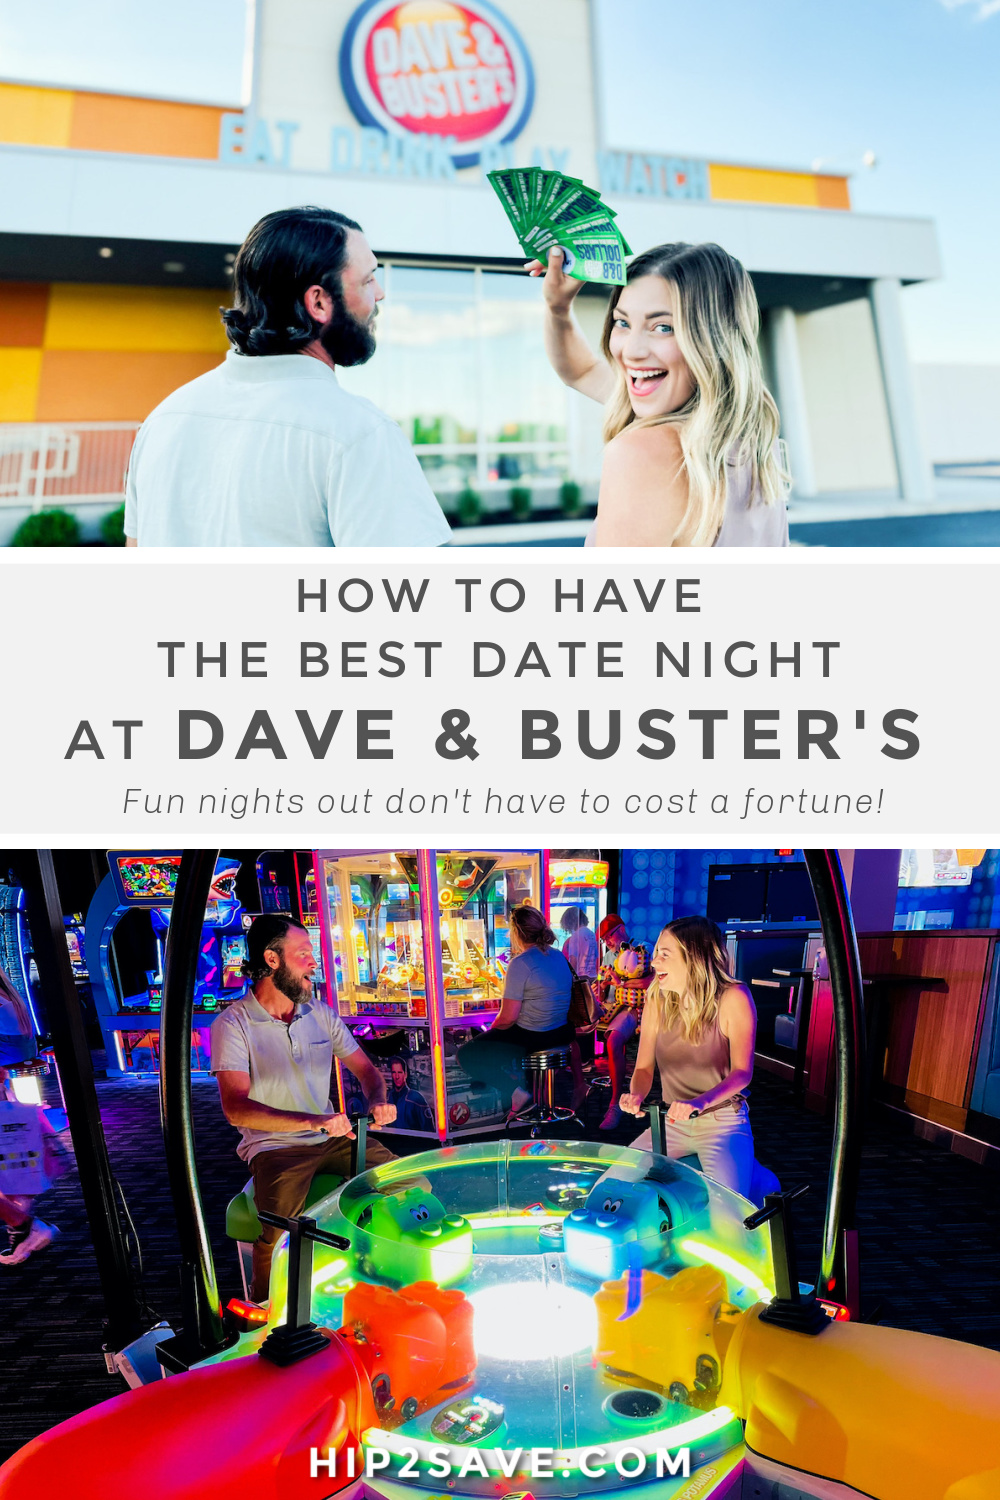 dave n buster coupons 2014